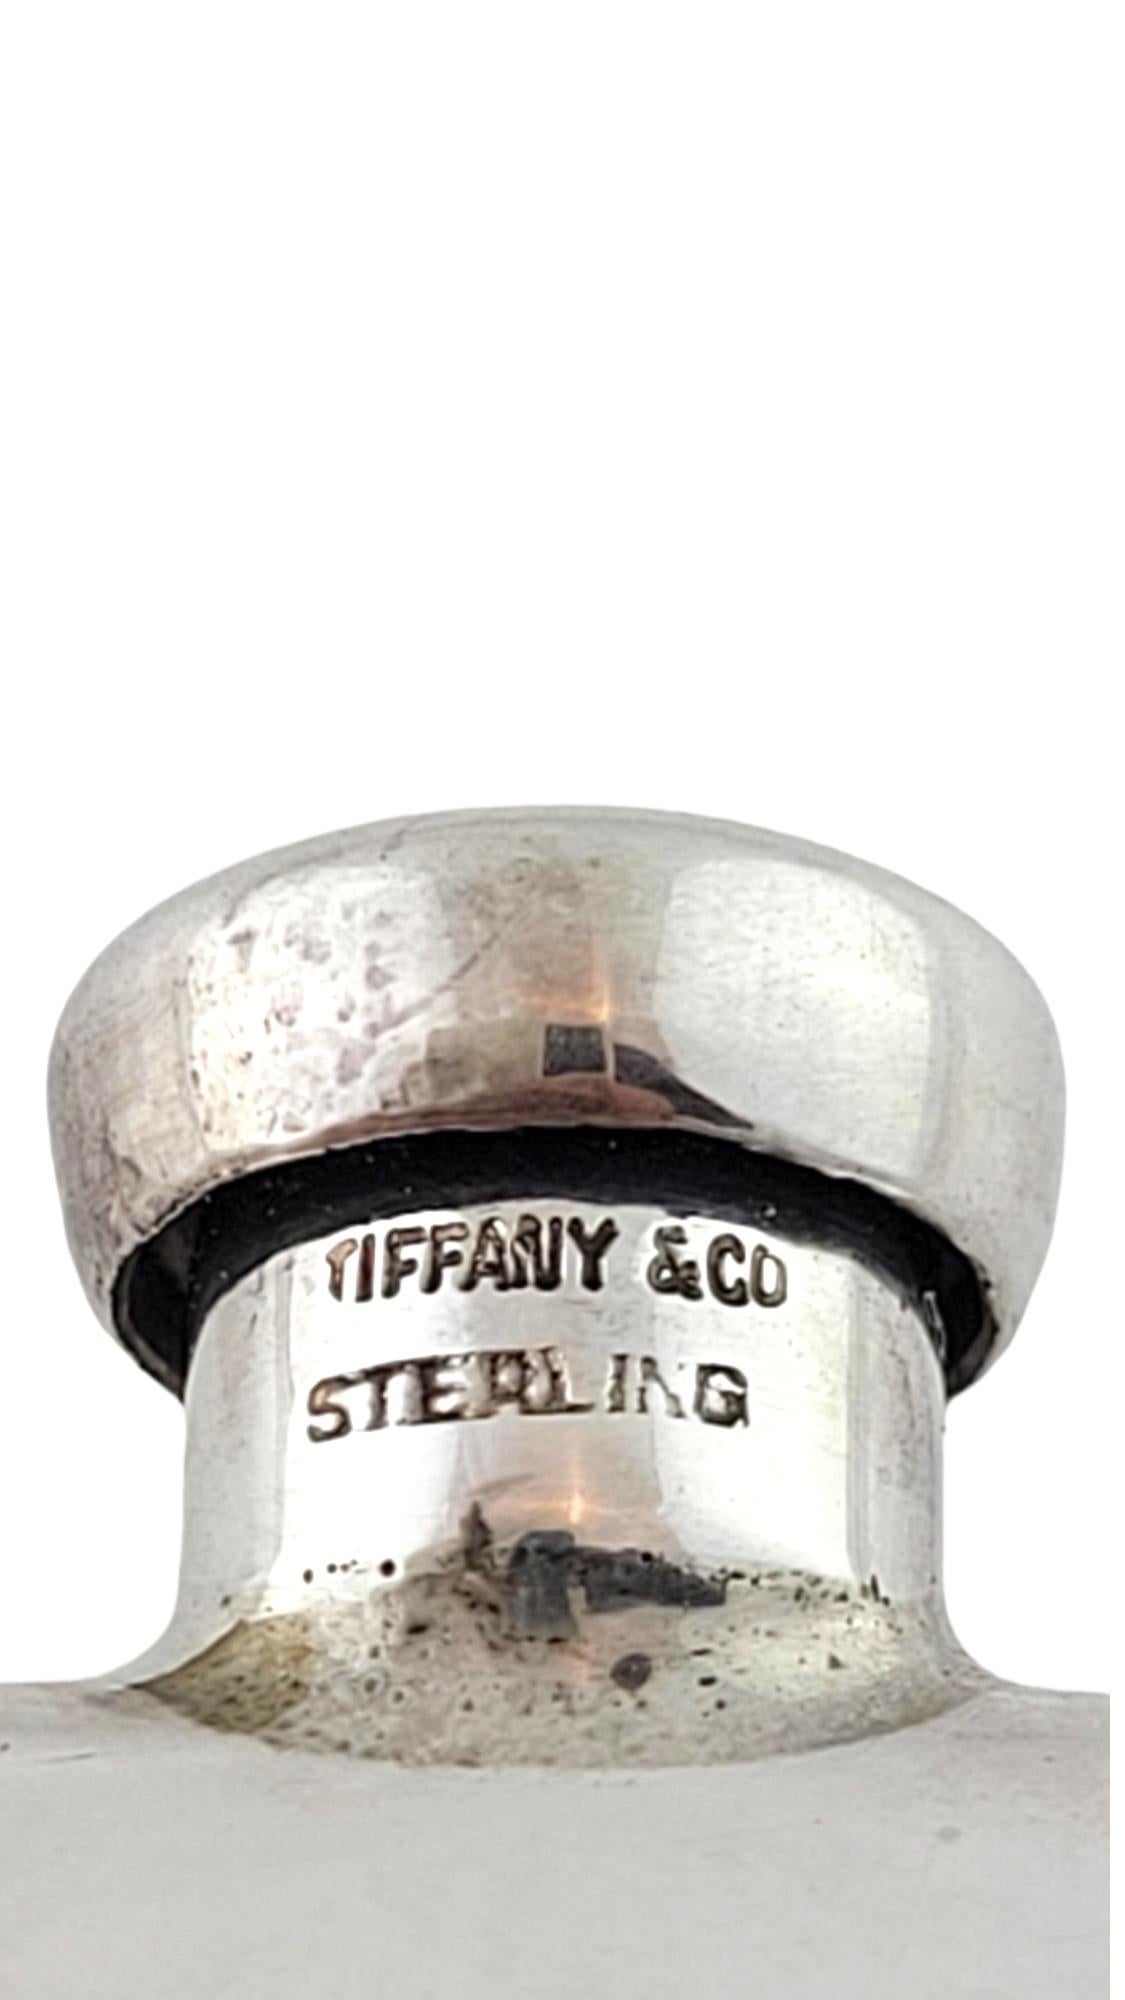 Vintage Tiffany & Co. Sterling Silver Engraved Perfume Flask #17411 For Sale 2